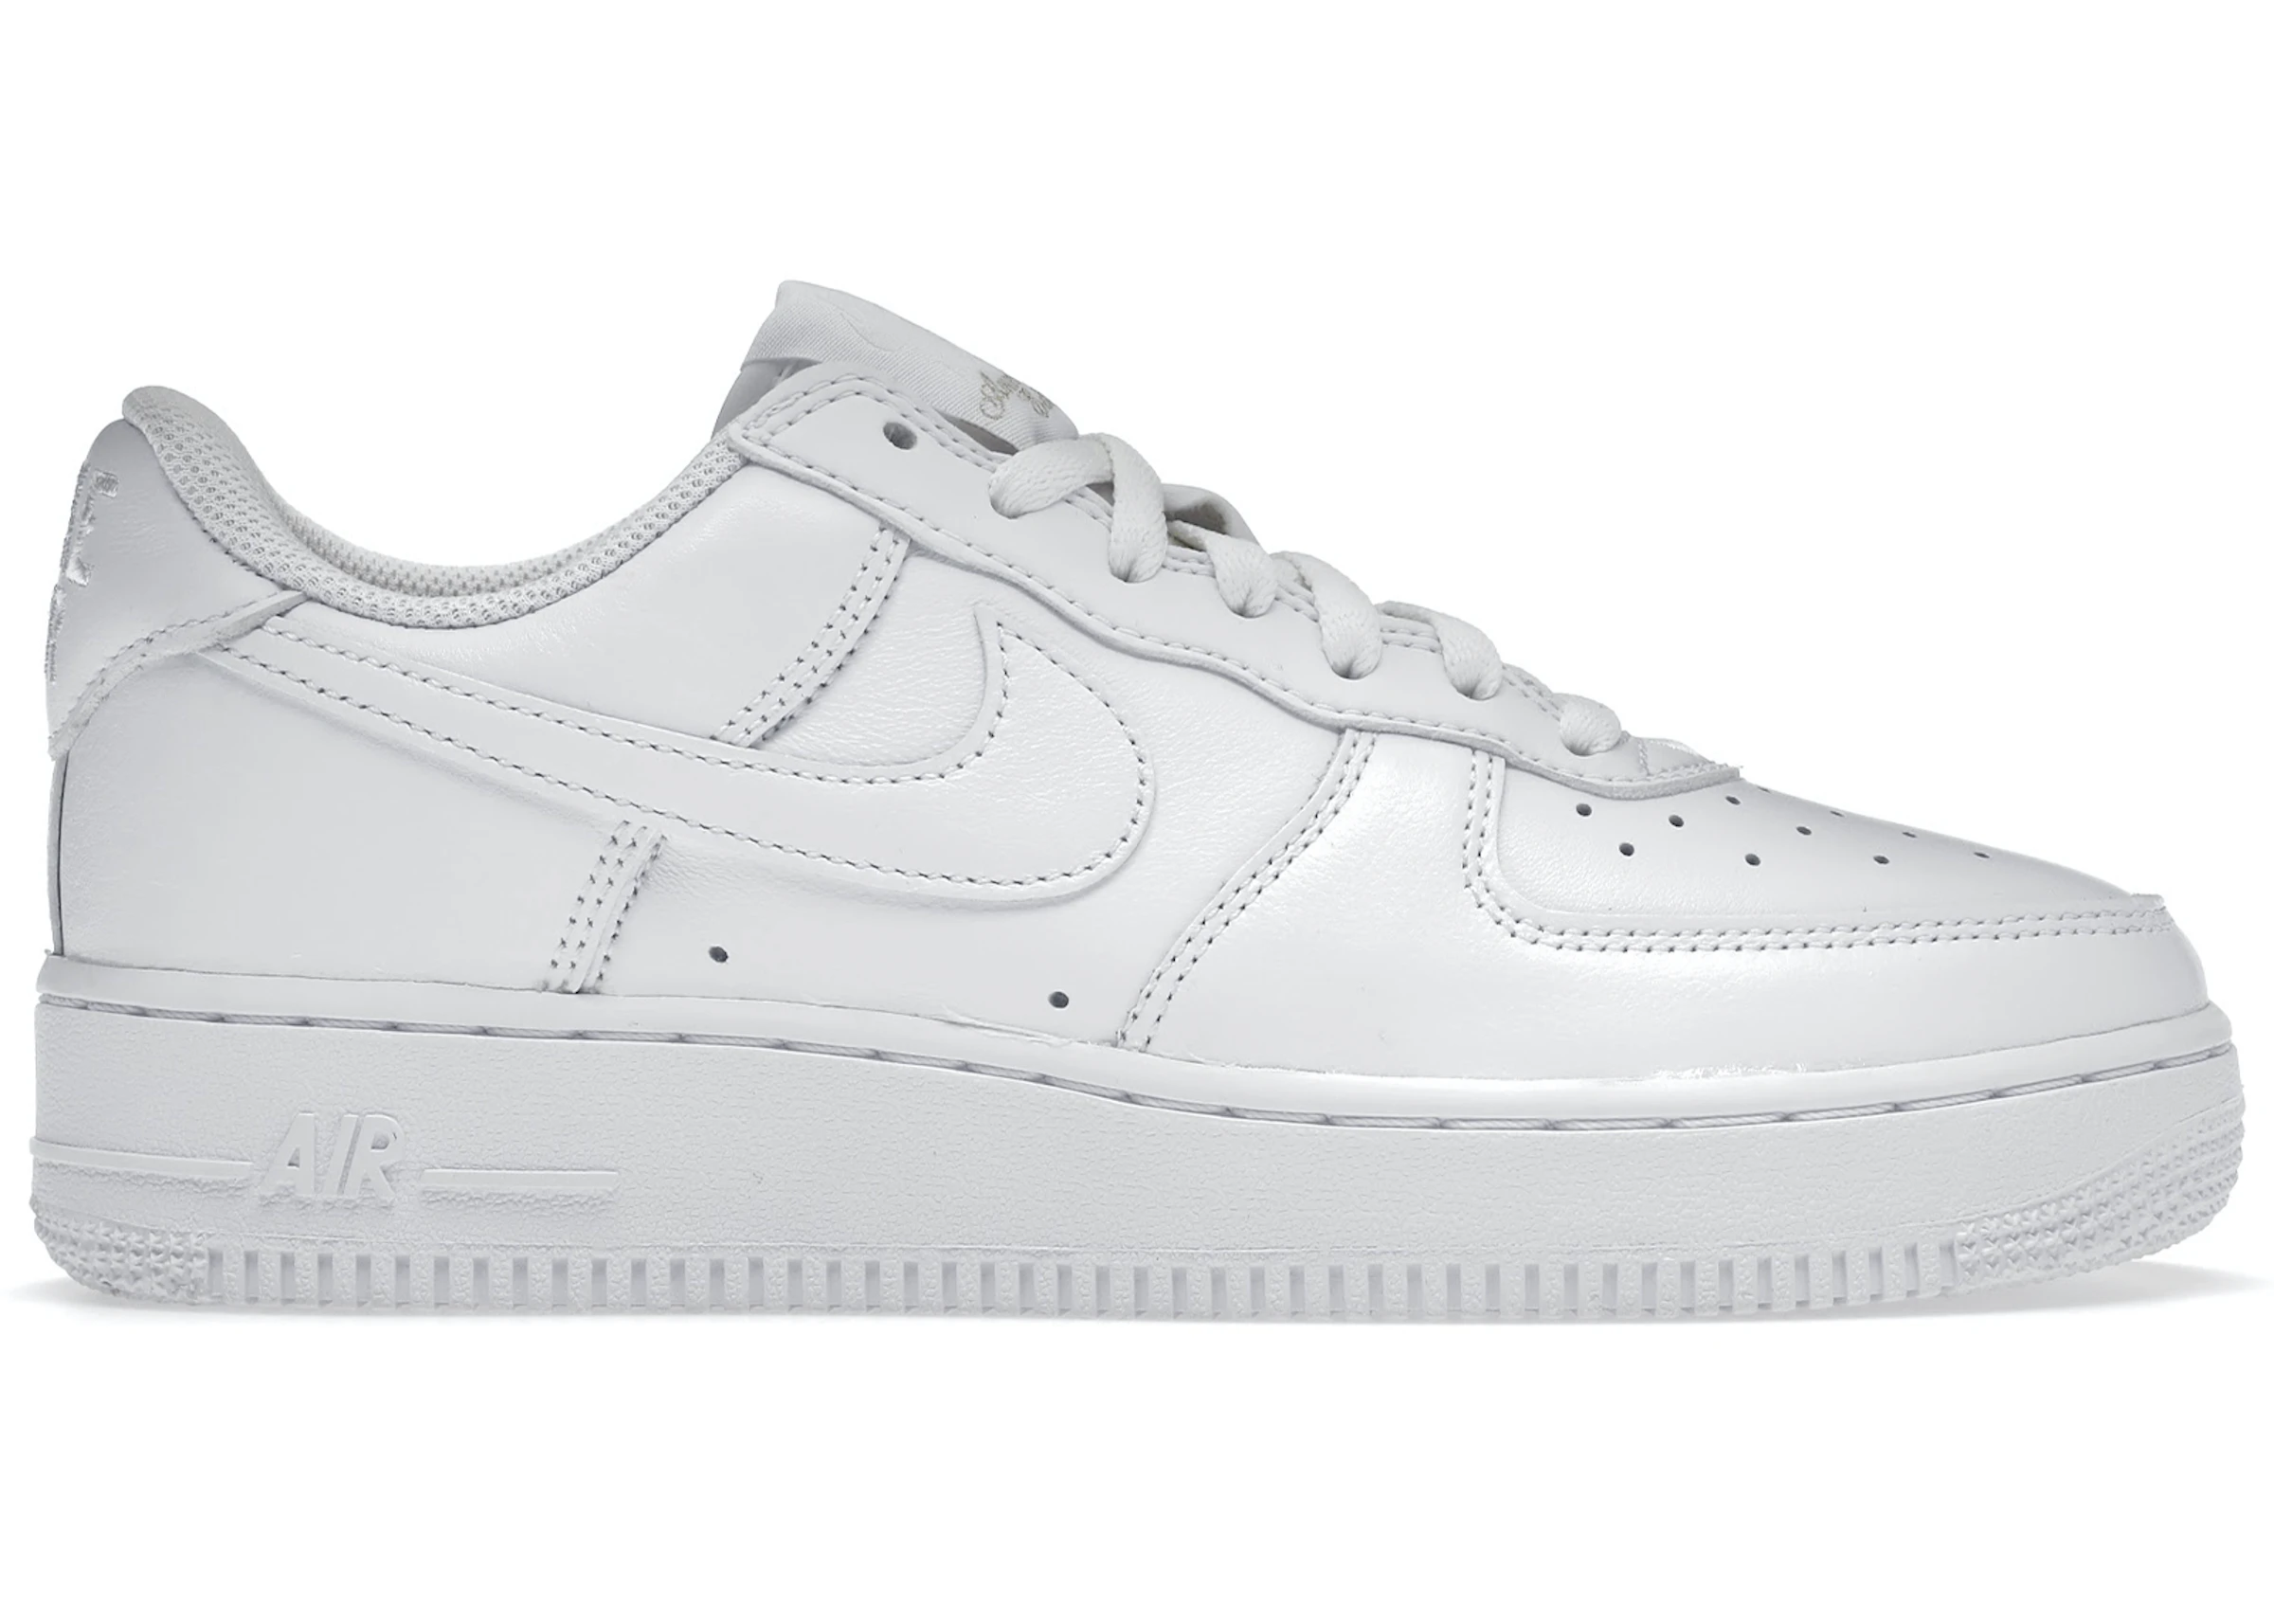 Reverse barrel Steadily Nike Air Force 1 '07 Low Color of the Month Triple White - DJ3911-100 - US